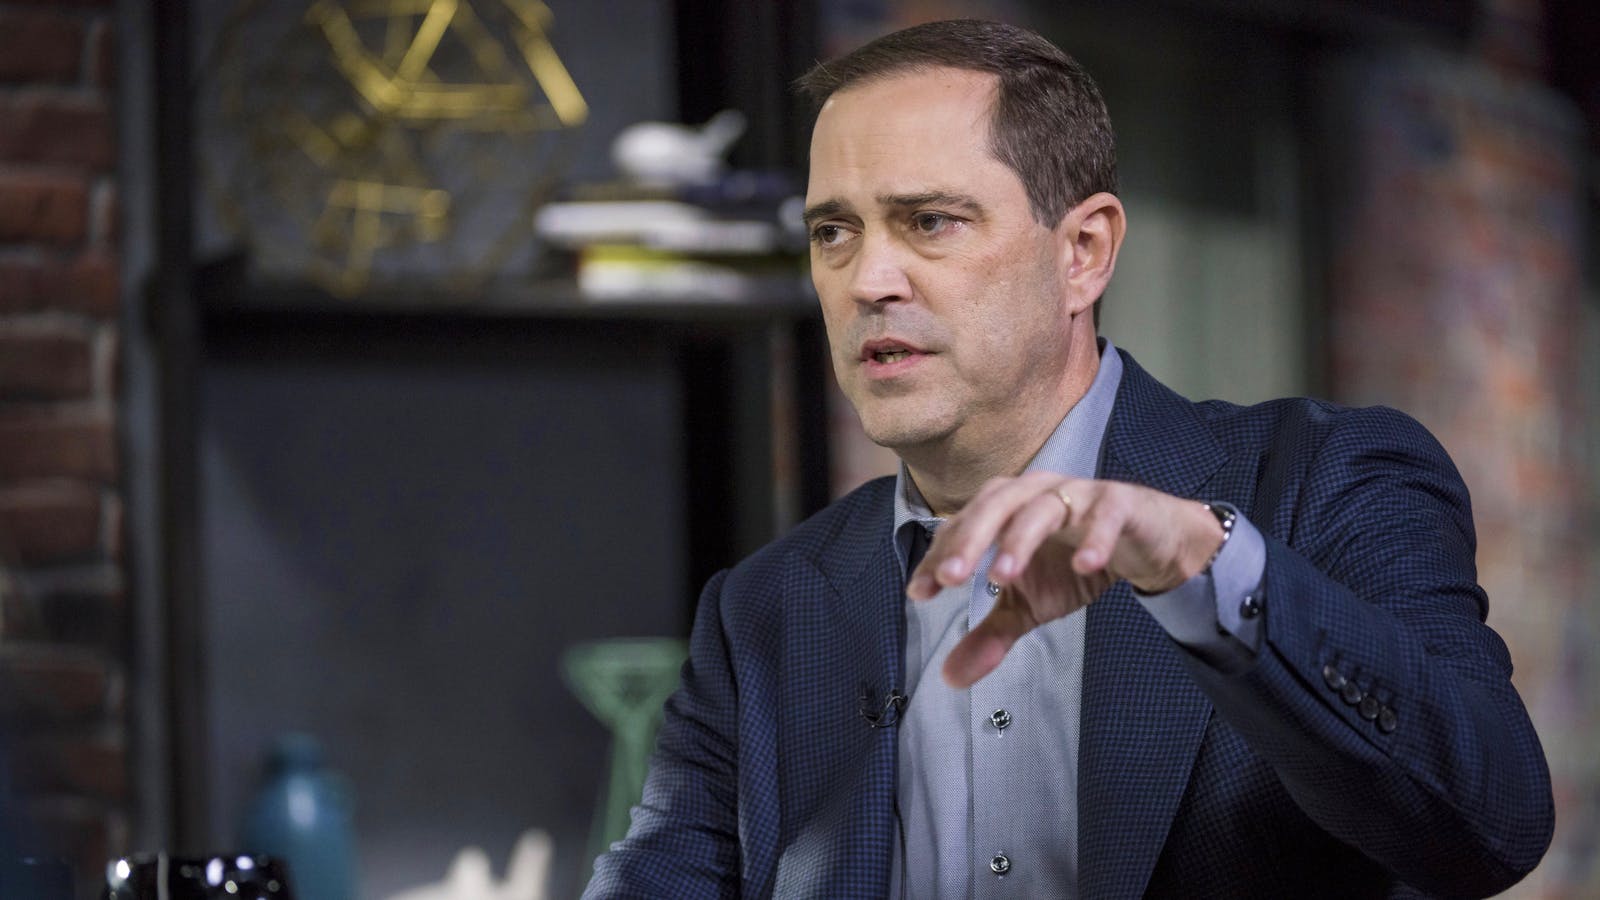 Cisco CEO Chuck Robbins. Photo by Bloomberg.